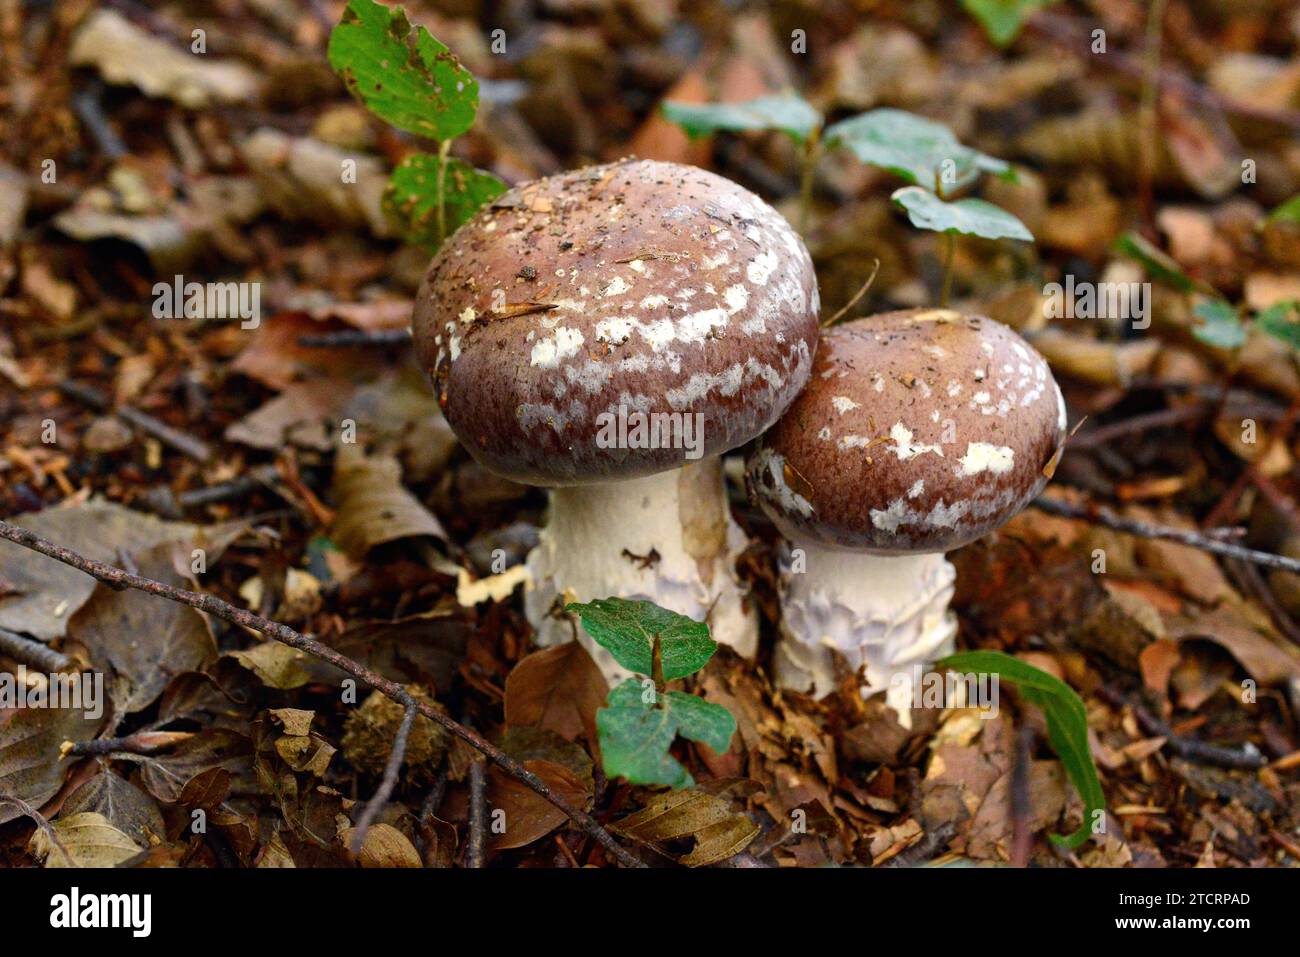 Cortinarius praestans is an edible mushroom. This photo was taken in a beech forest of Montseny Biosphere Reserve, Barcelona province, Catalonia, Spai Stock Photo